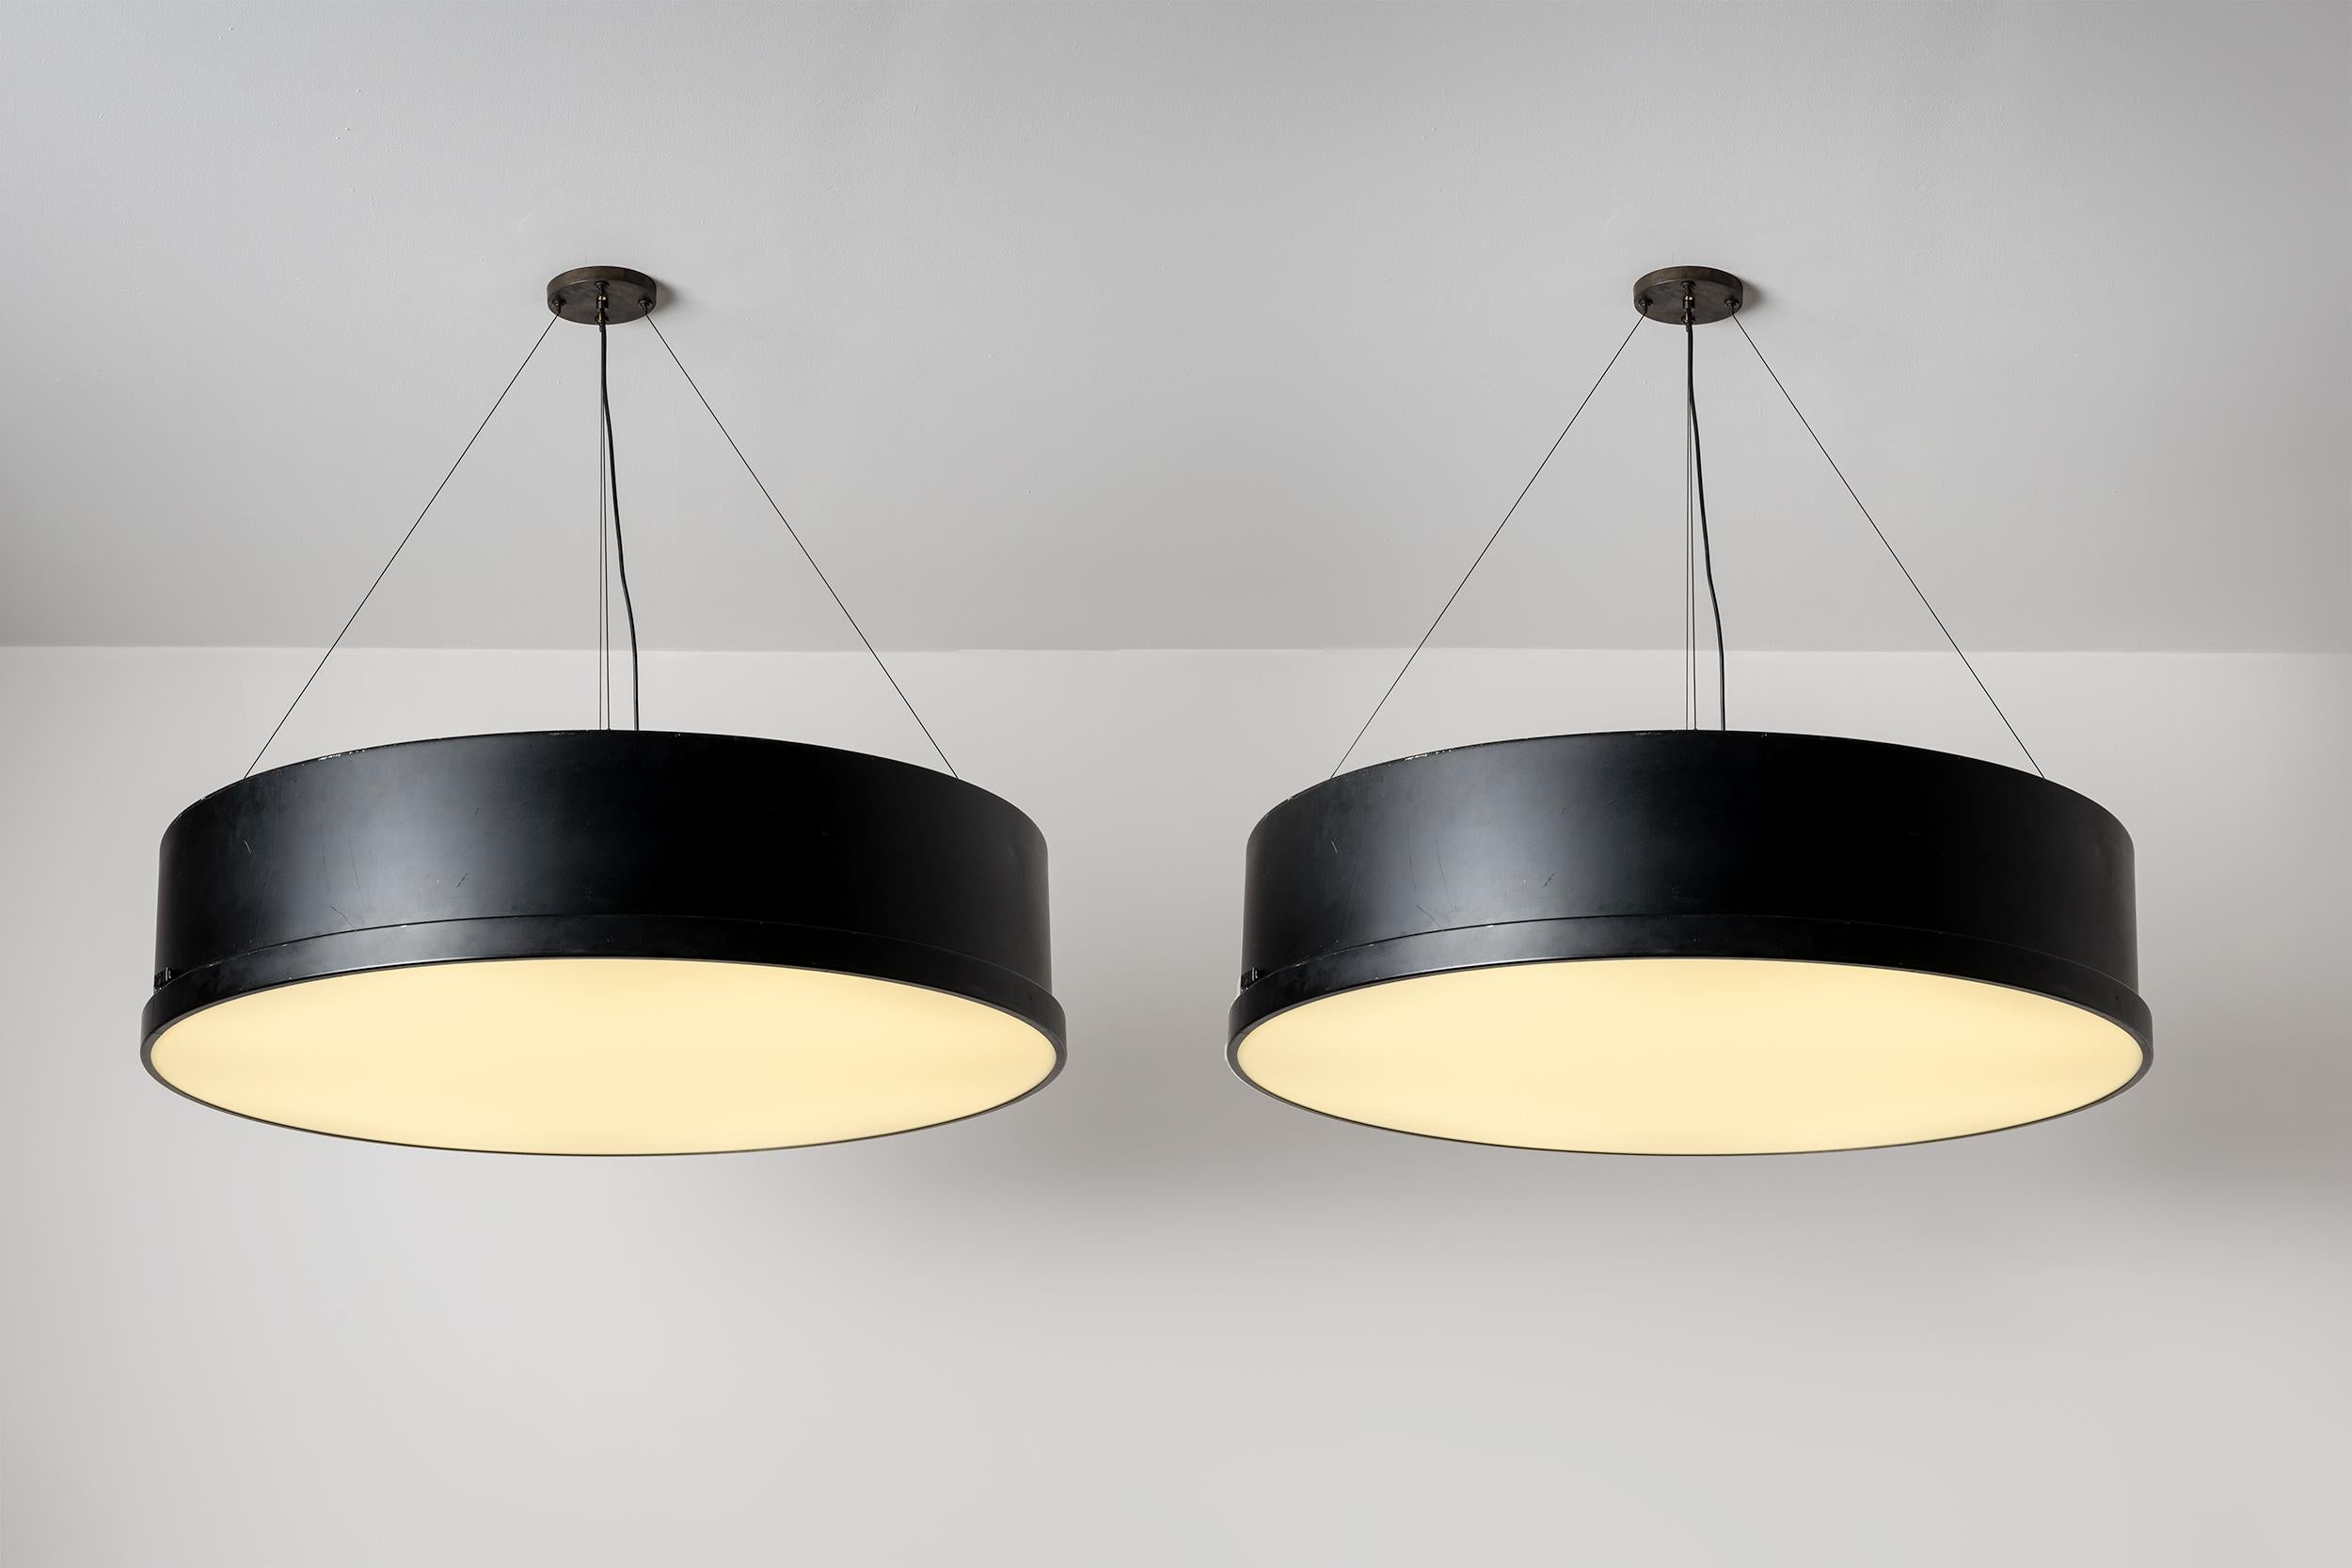 Large custom pair of ceiling lamps with lacquered metal structure and plexiglass diffuser. Designed by Bruno Gatta for Stilnovo. Produced in Italy, circa the 1950s. Each drum consists of ten fluorescent tubes. Wired for US standards. Priced and sold